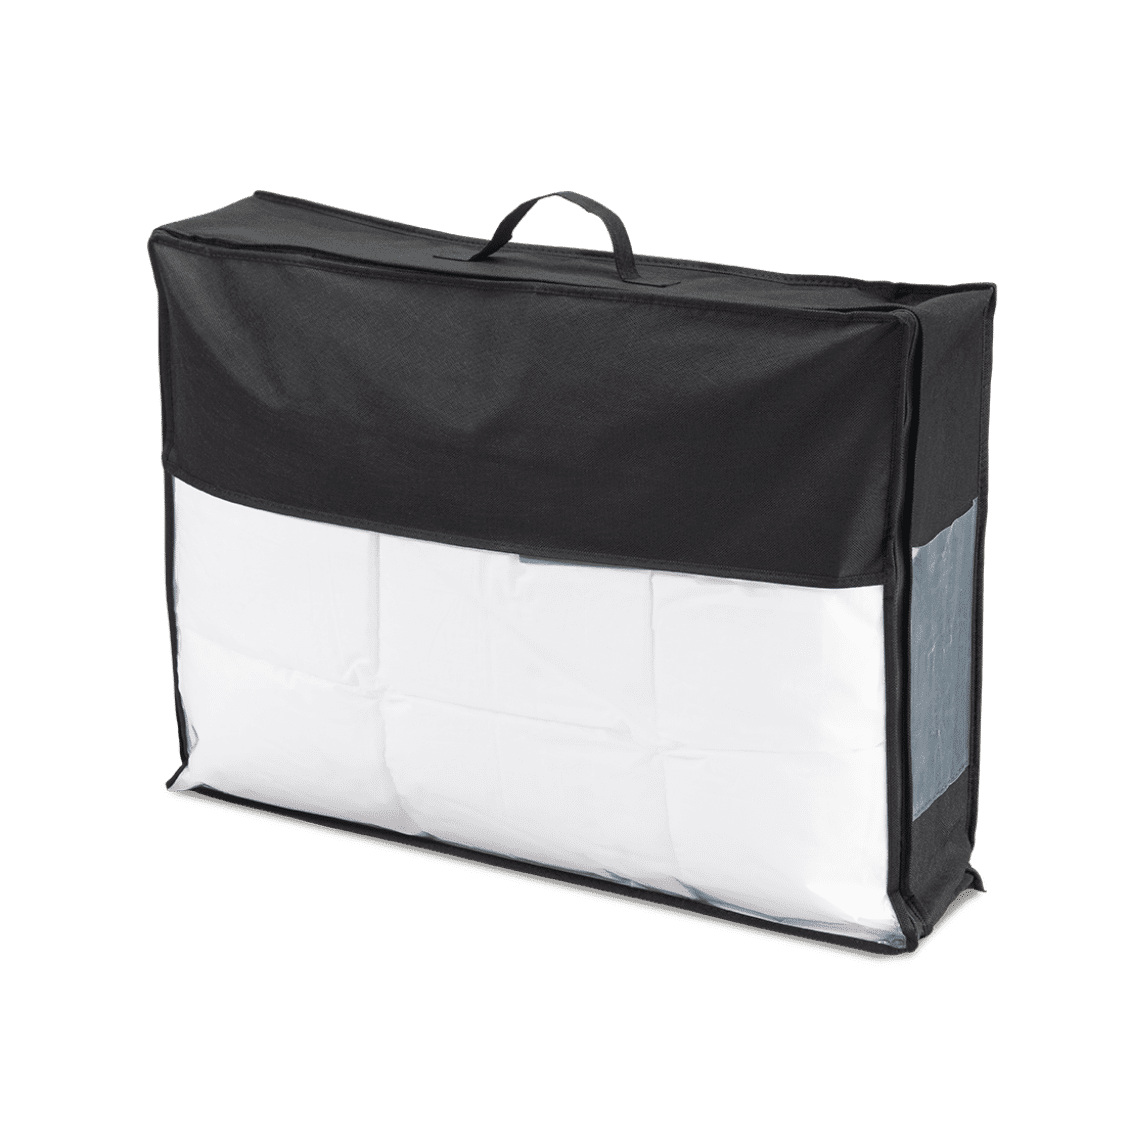 SLEEPWELL COLLECTION duvet carrying bag